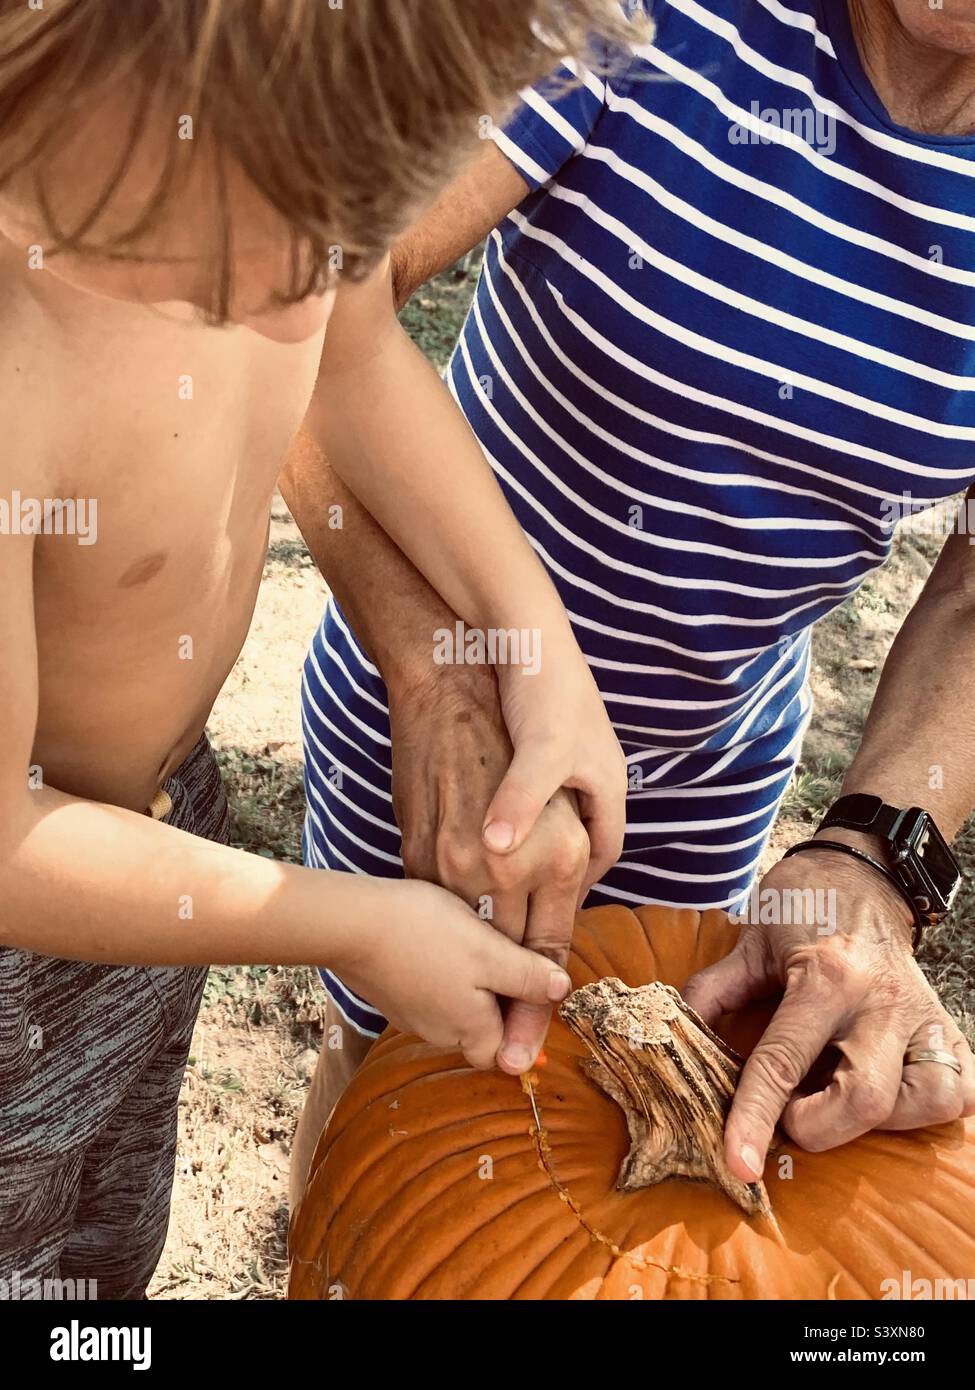 Older woman and child carving pumpkin together Stock Photo